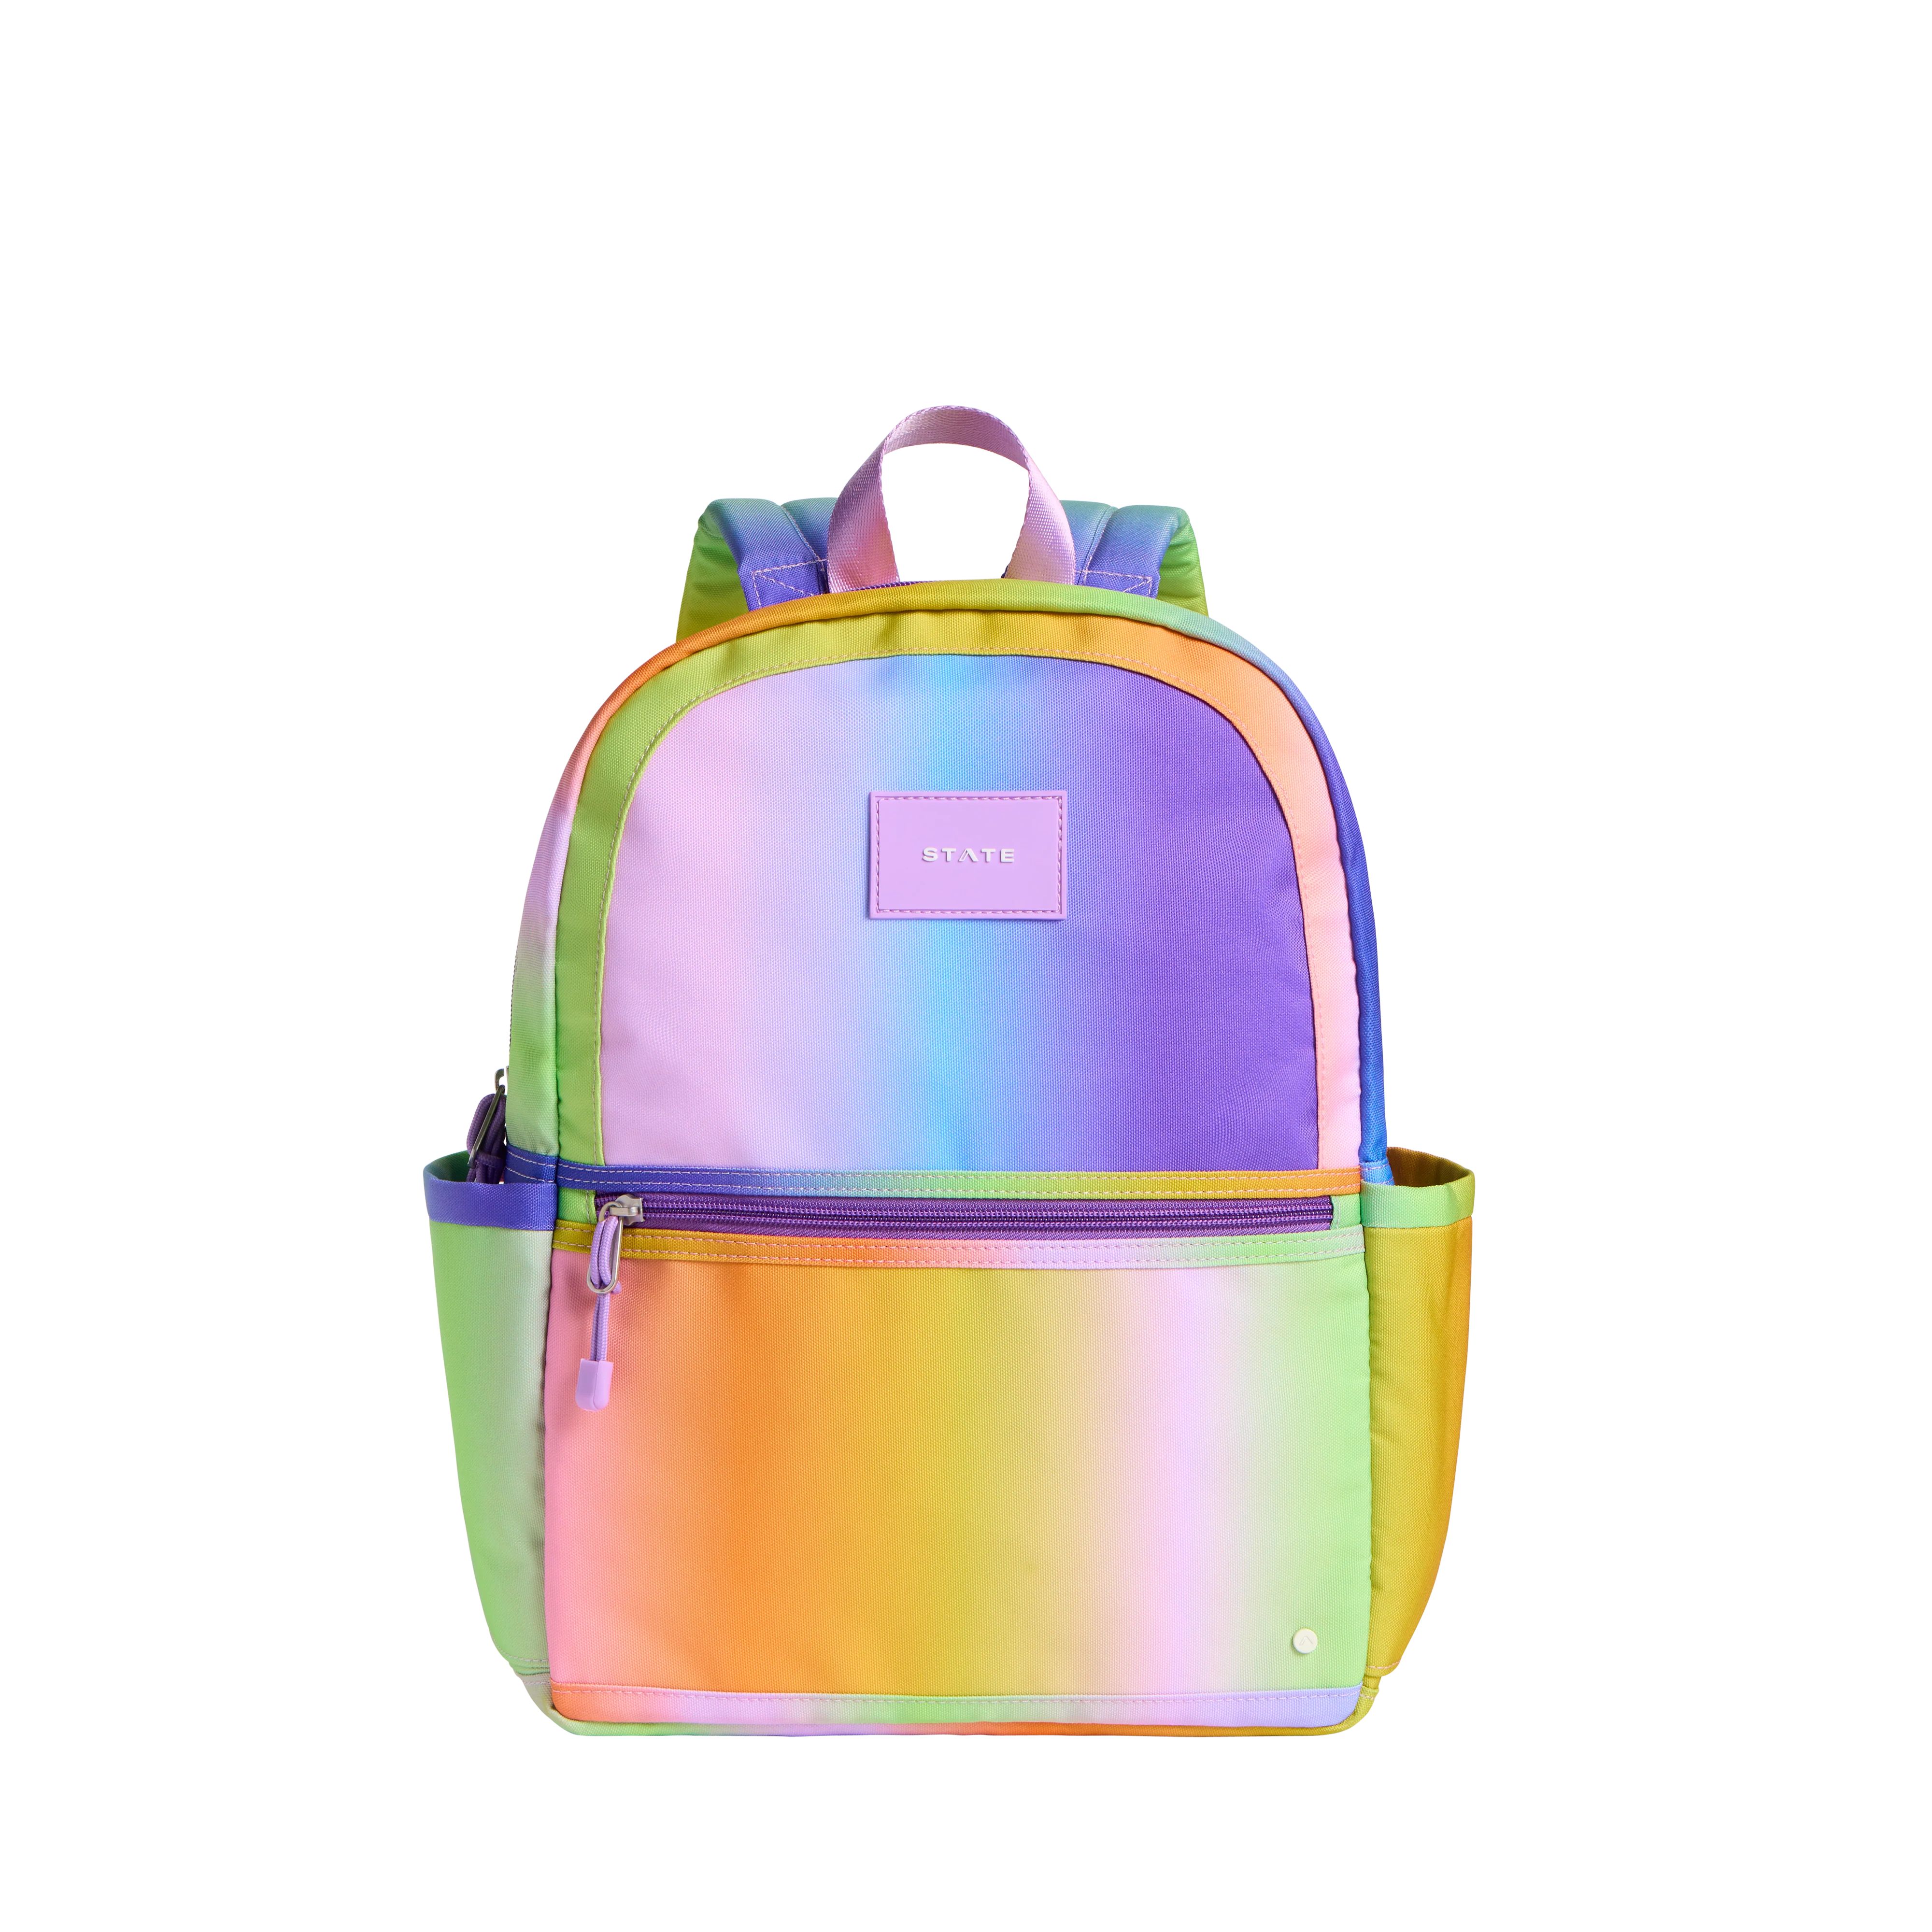 STATE Bags | Kane Kids Travel Backpack Recycled Poly Canvas Rainbow Gradient | STATE Bags